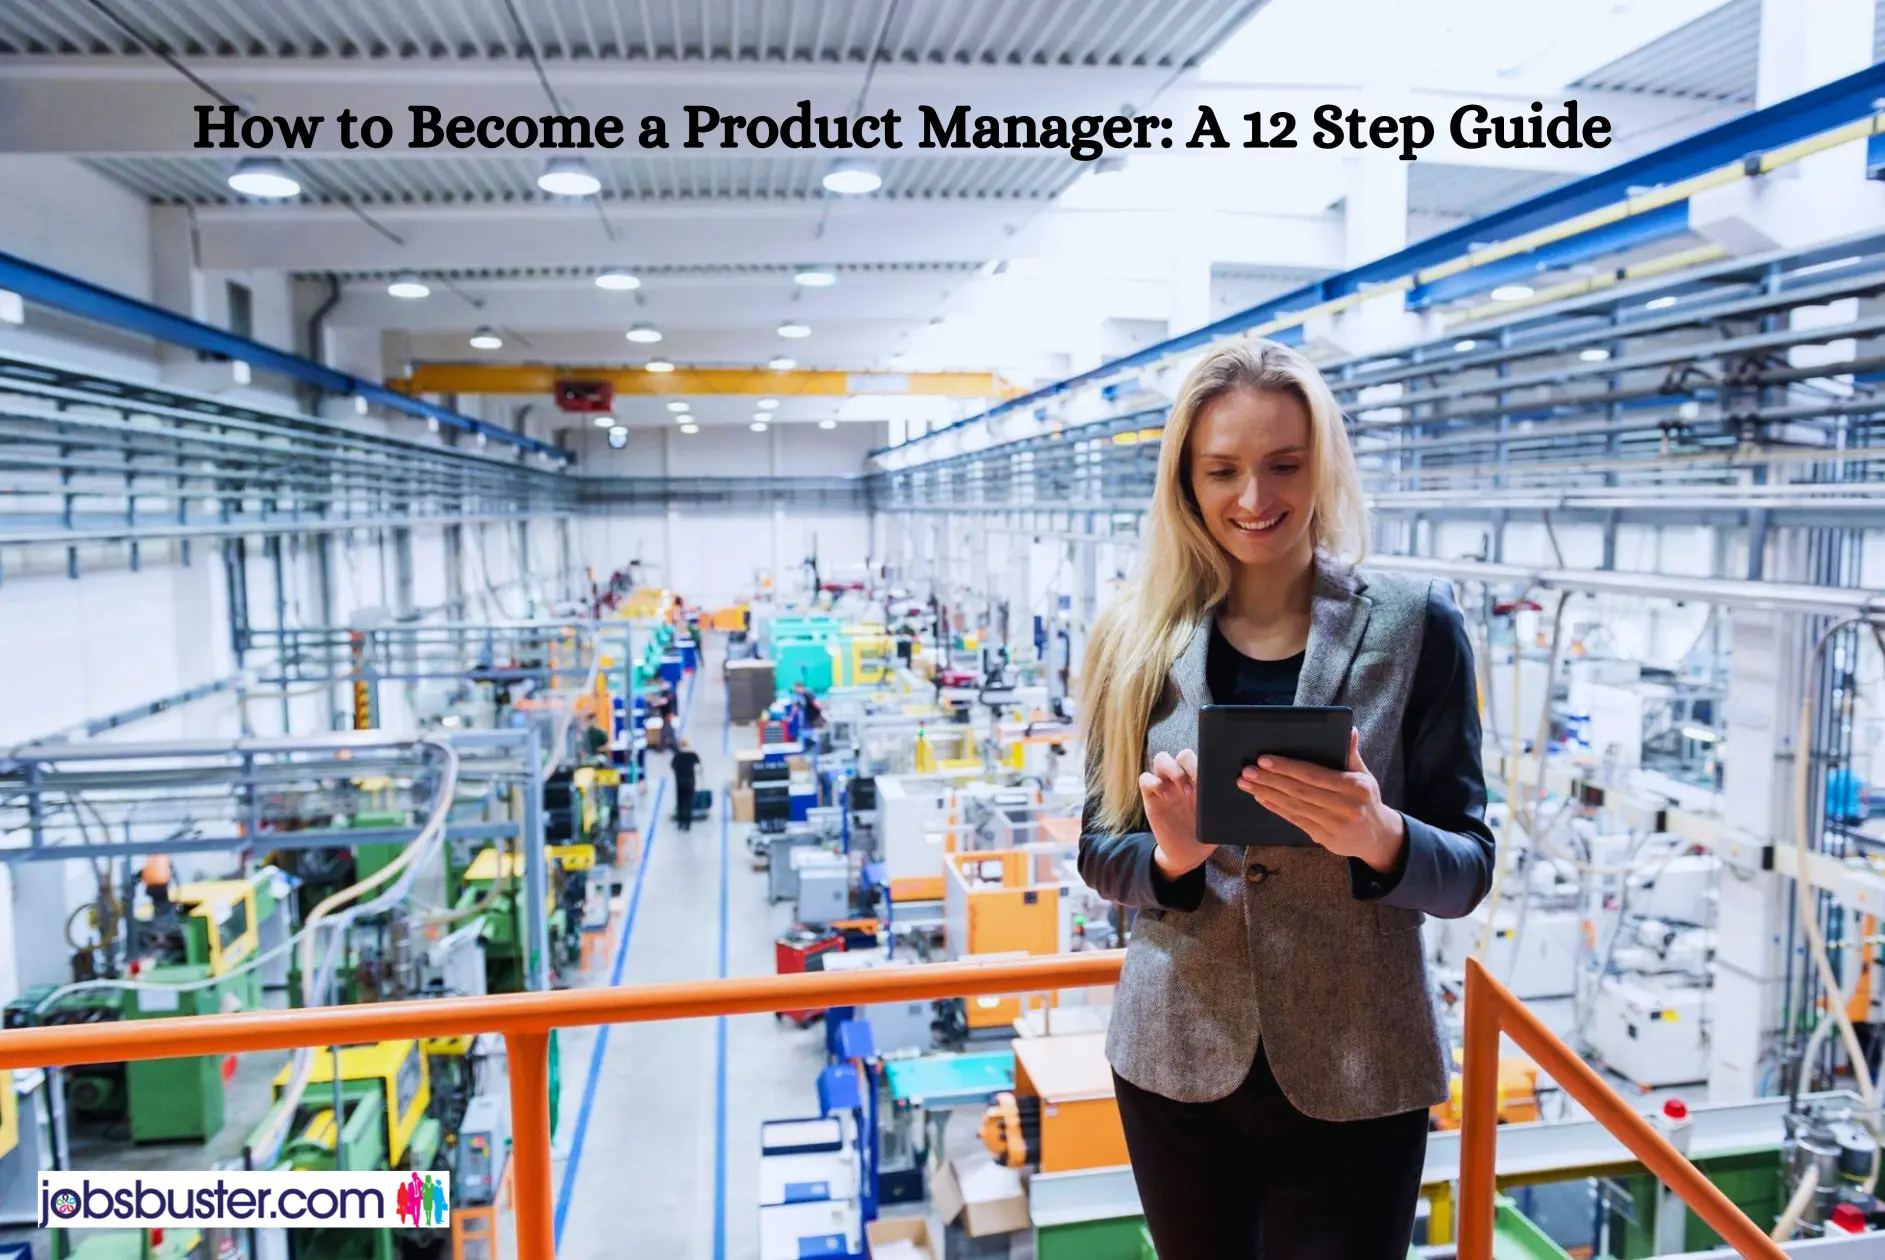 How to Become a Product Manager: A 12 Step Guide